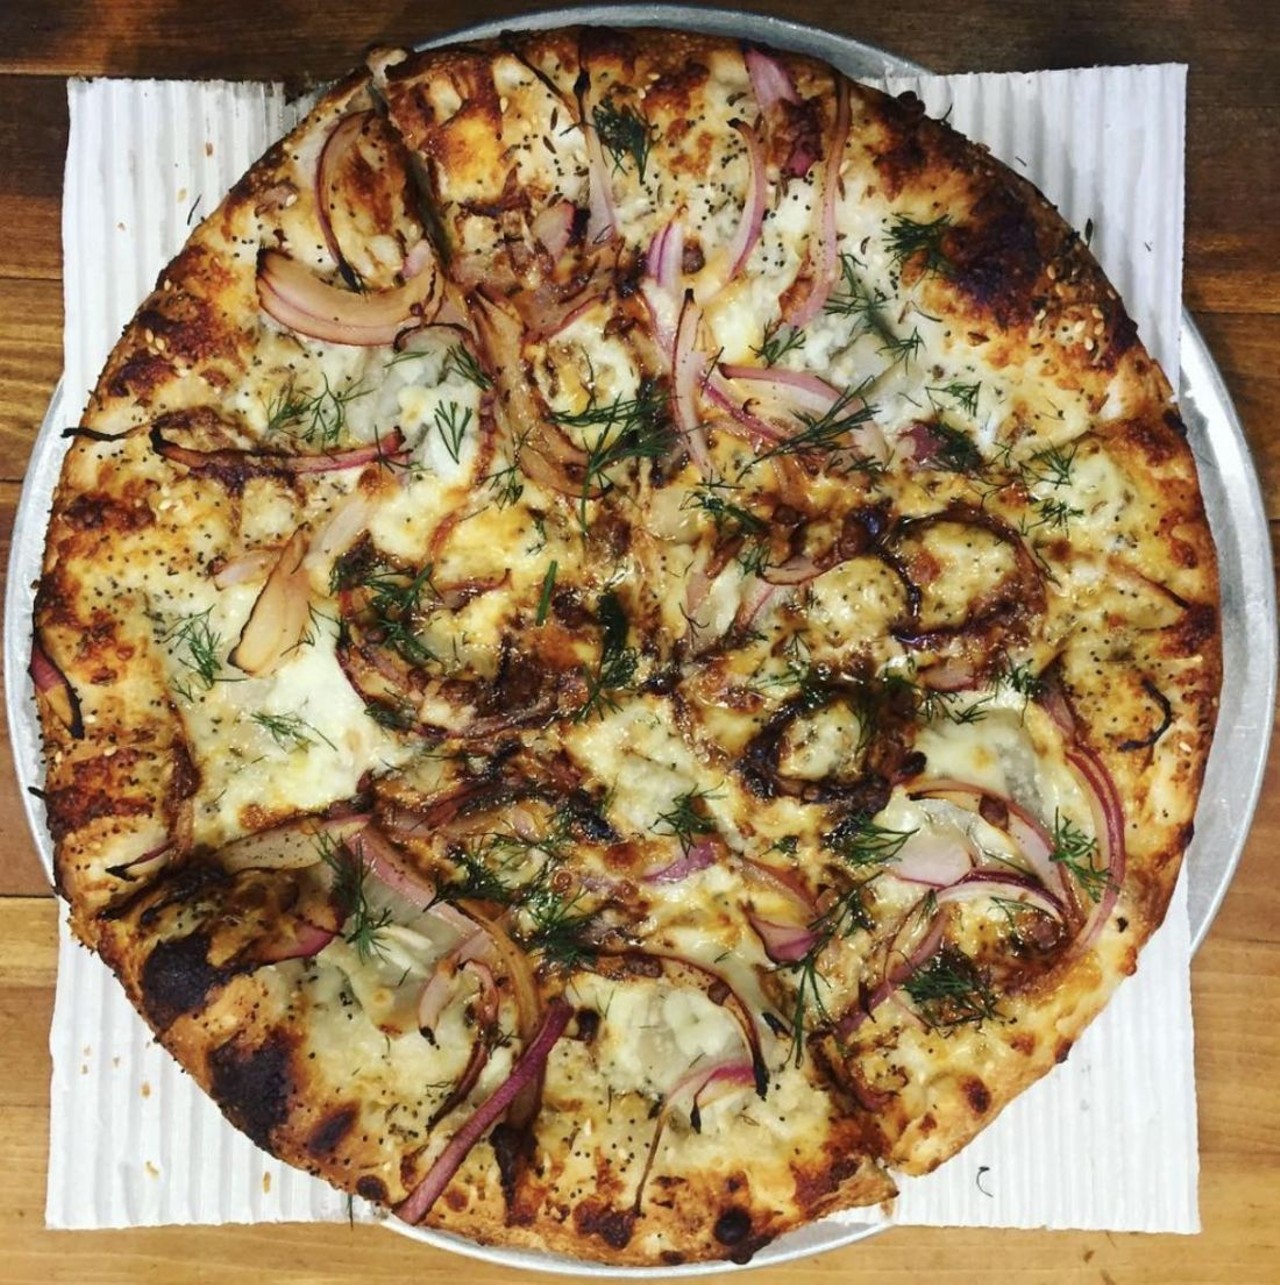 Pie-Sci
5163 Trumbull Ave, Detroit, MI 48208
This create your own pizza place is perfect for your picky eaters. A small pie is only $8 and includes up to four toppings.
Photo courtesy of @piescipizza